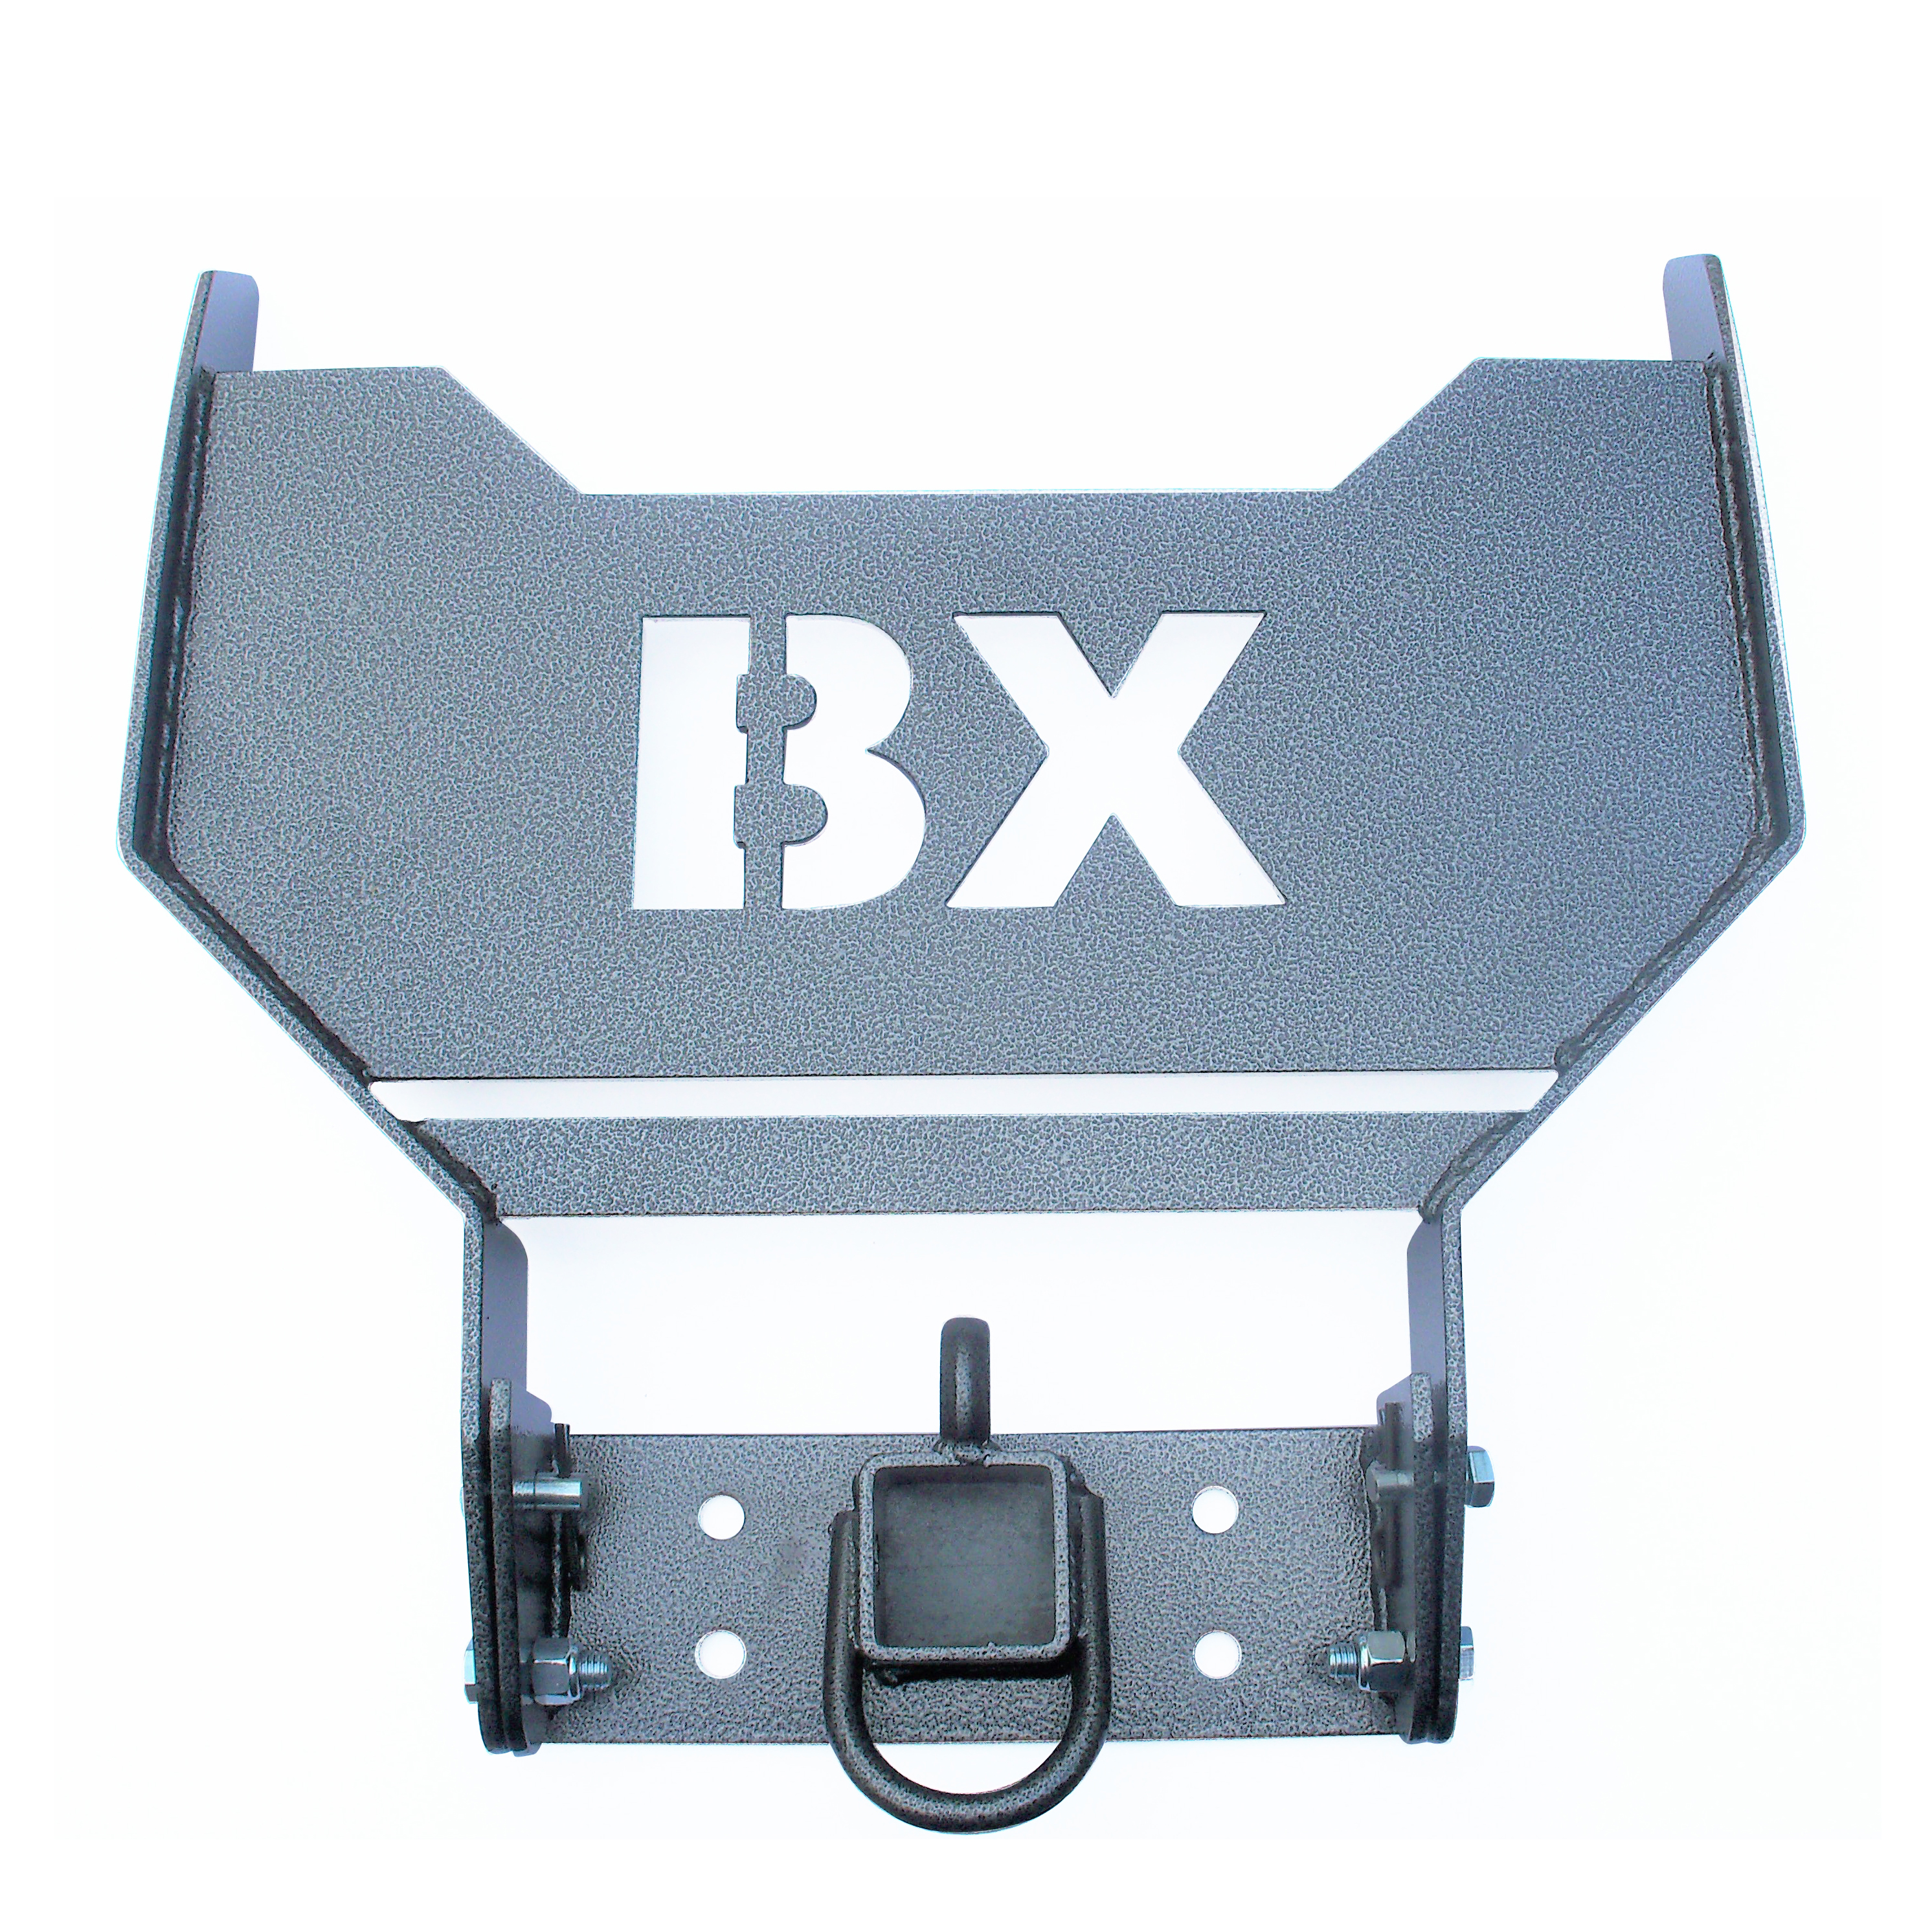 BX23 Grill Guard with Hitch (Silver Vein)